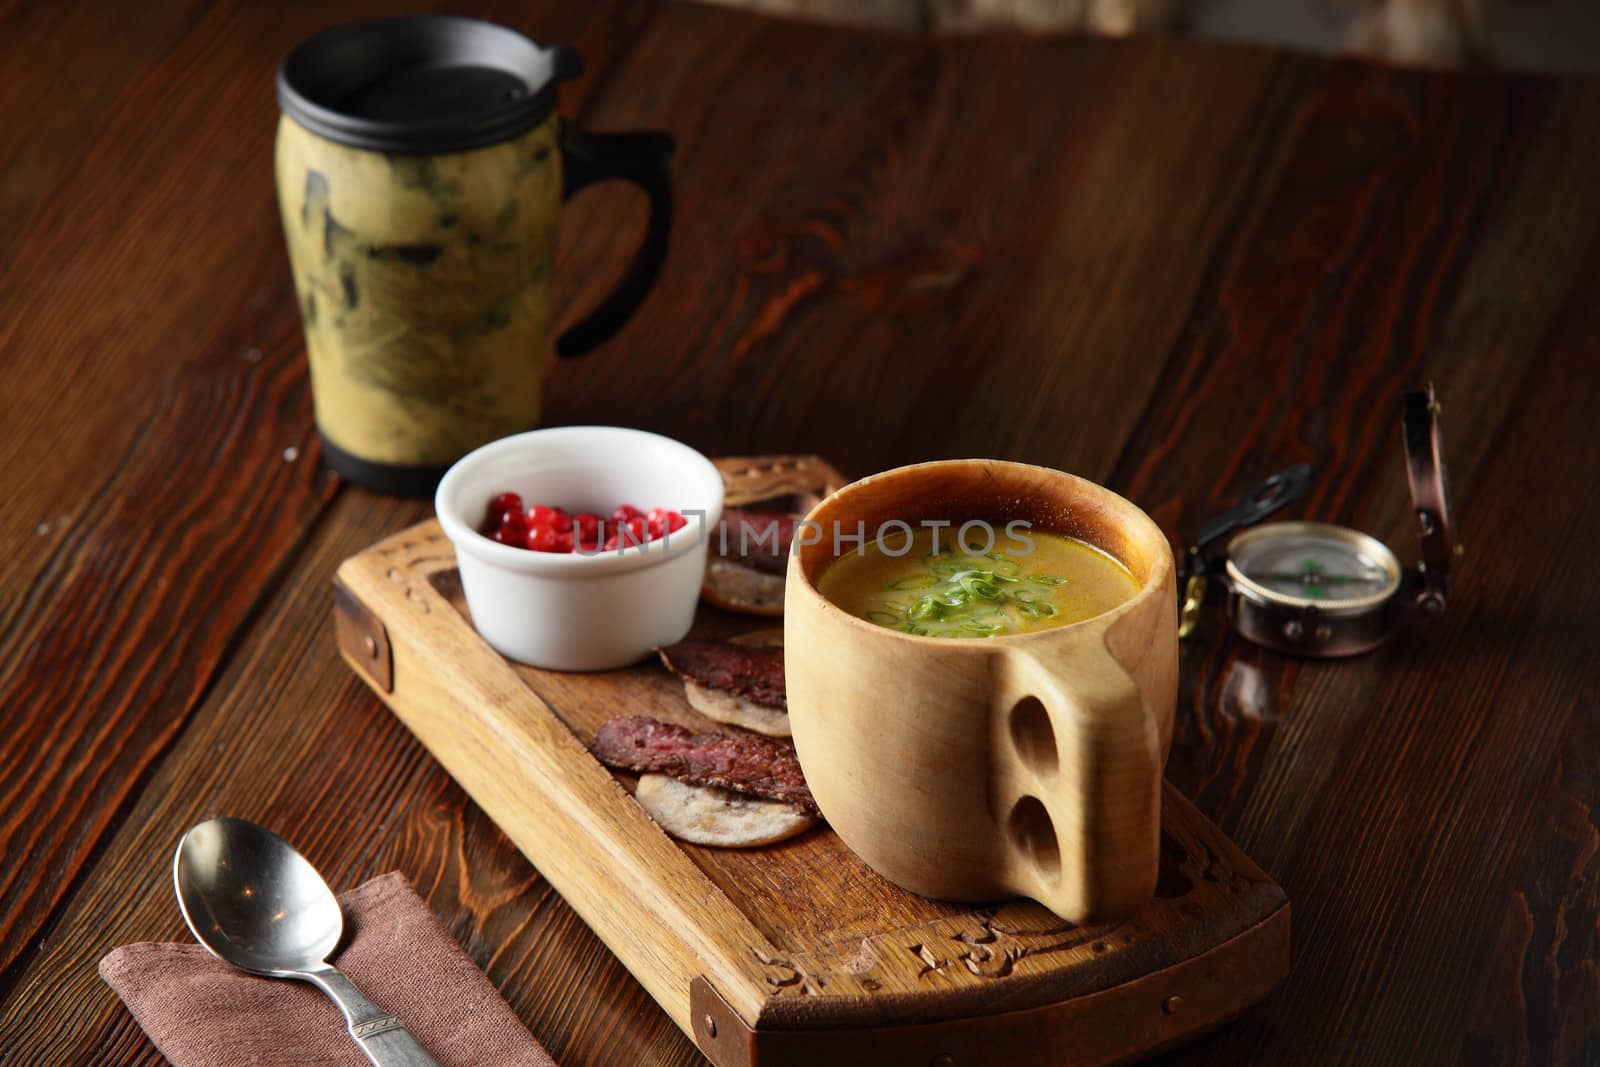 tasty and fresh european soup by fiphoto